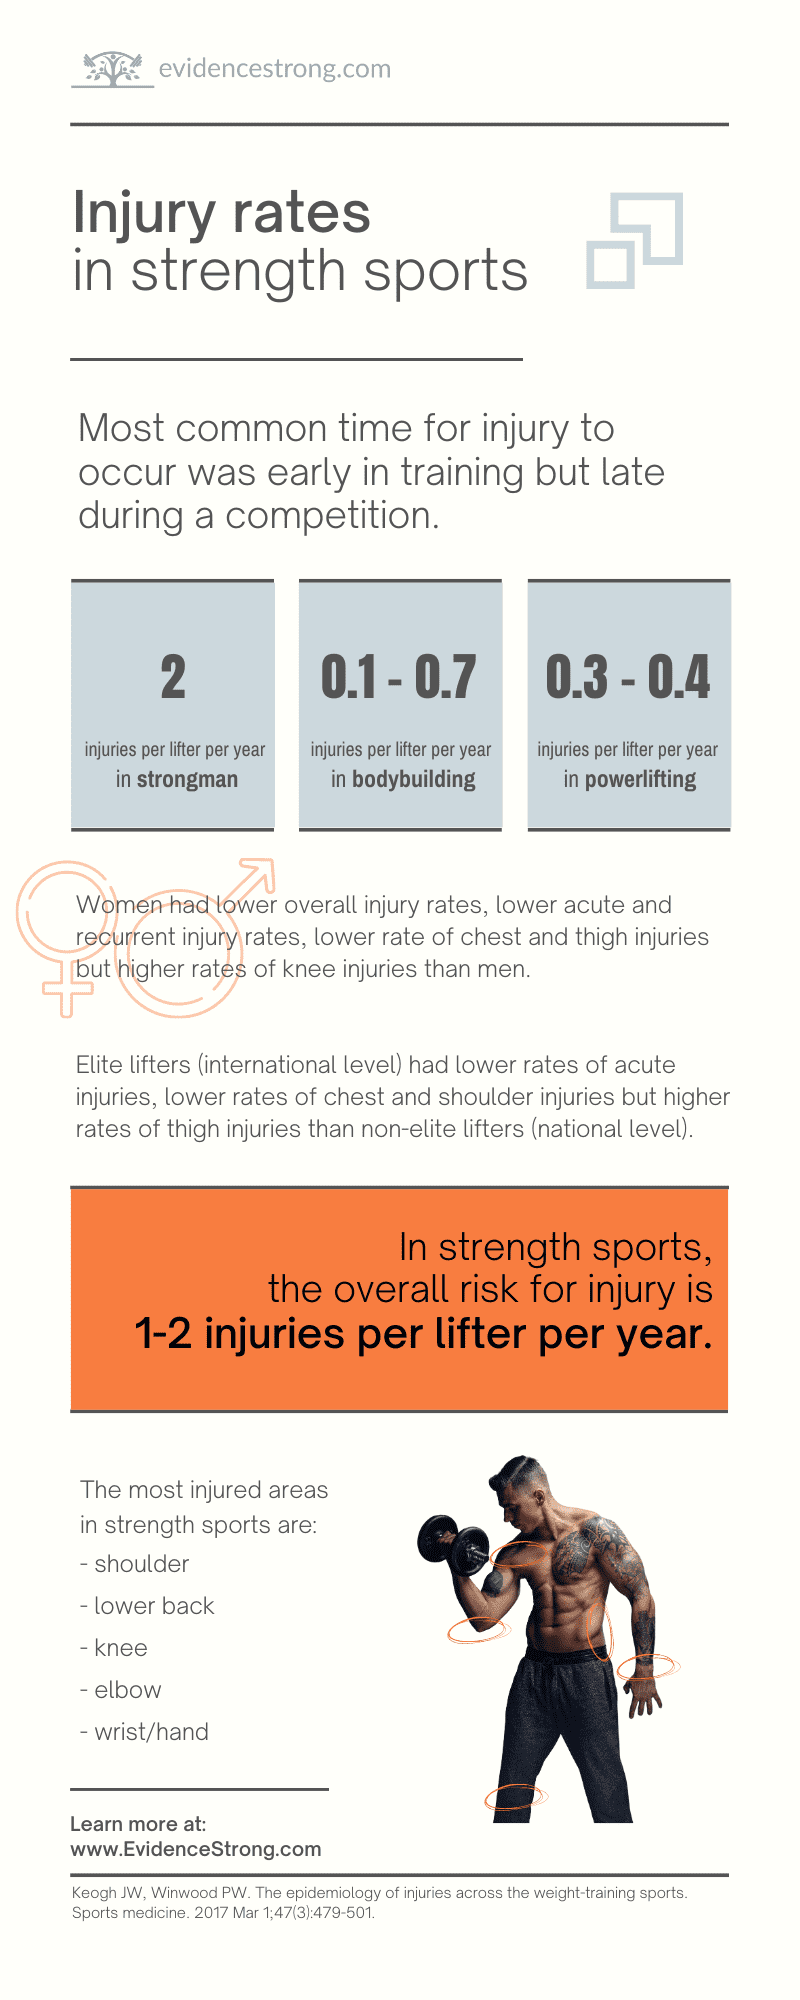 sports injury research paper